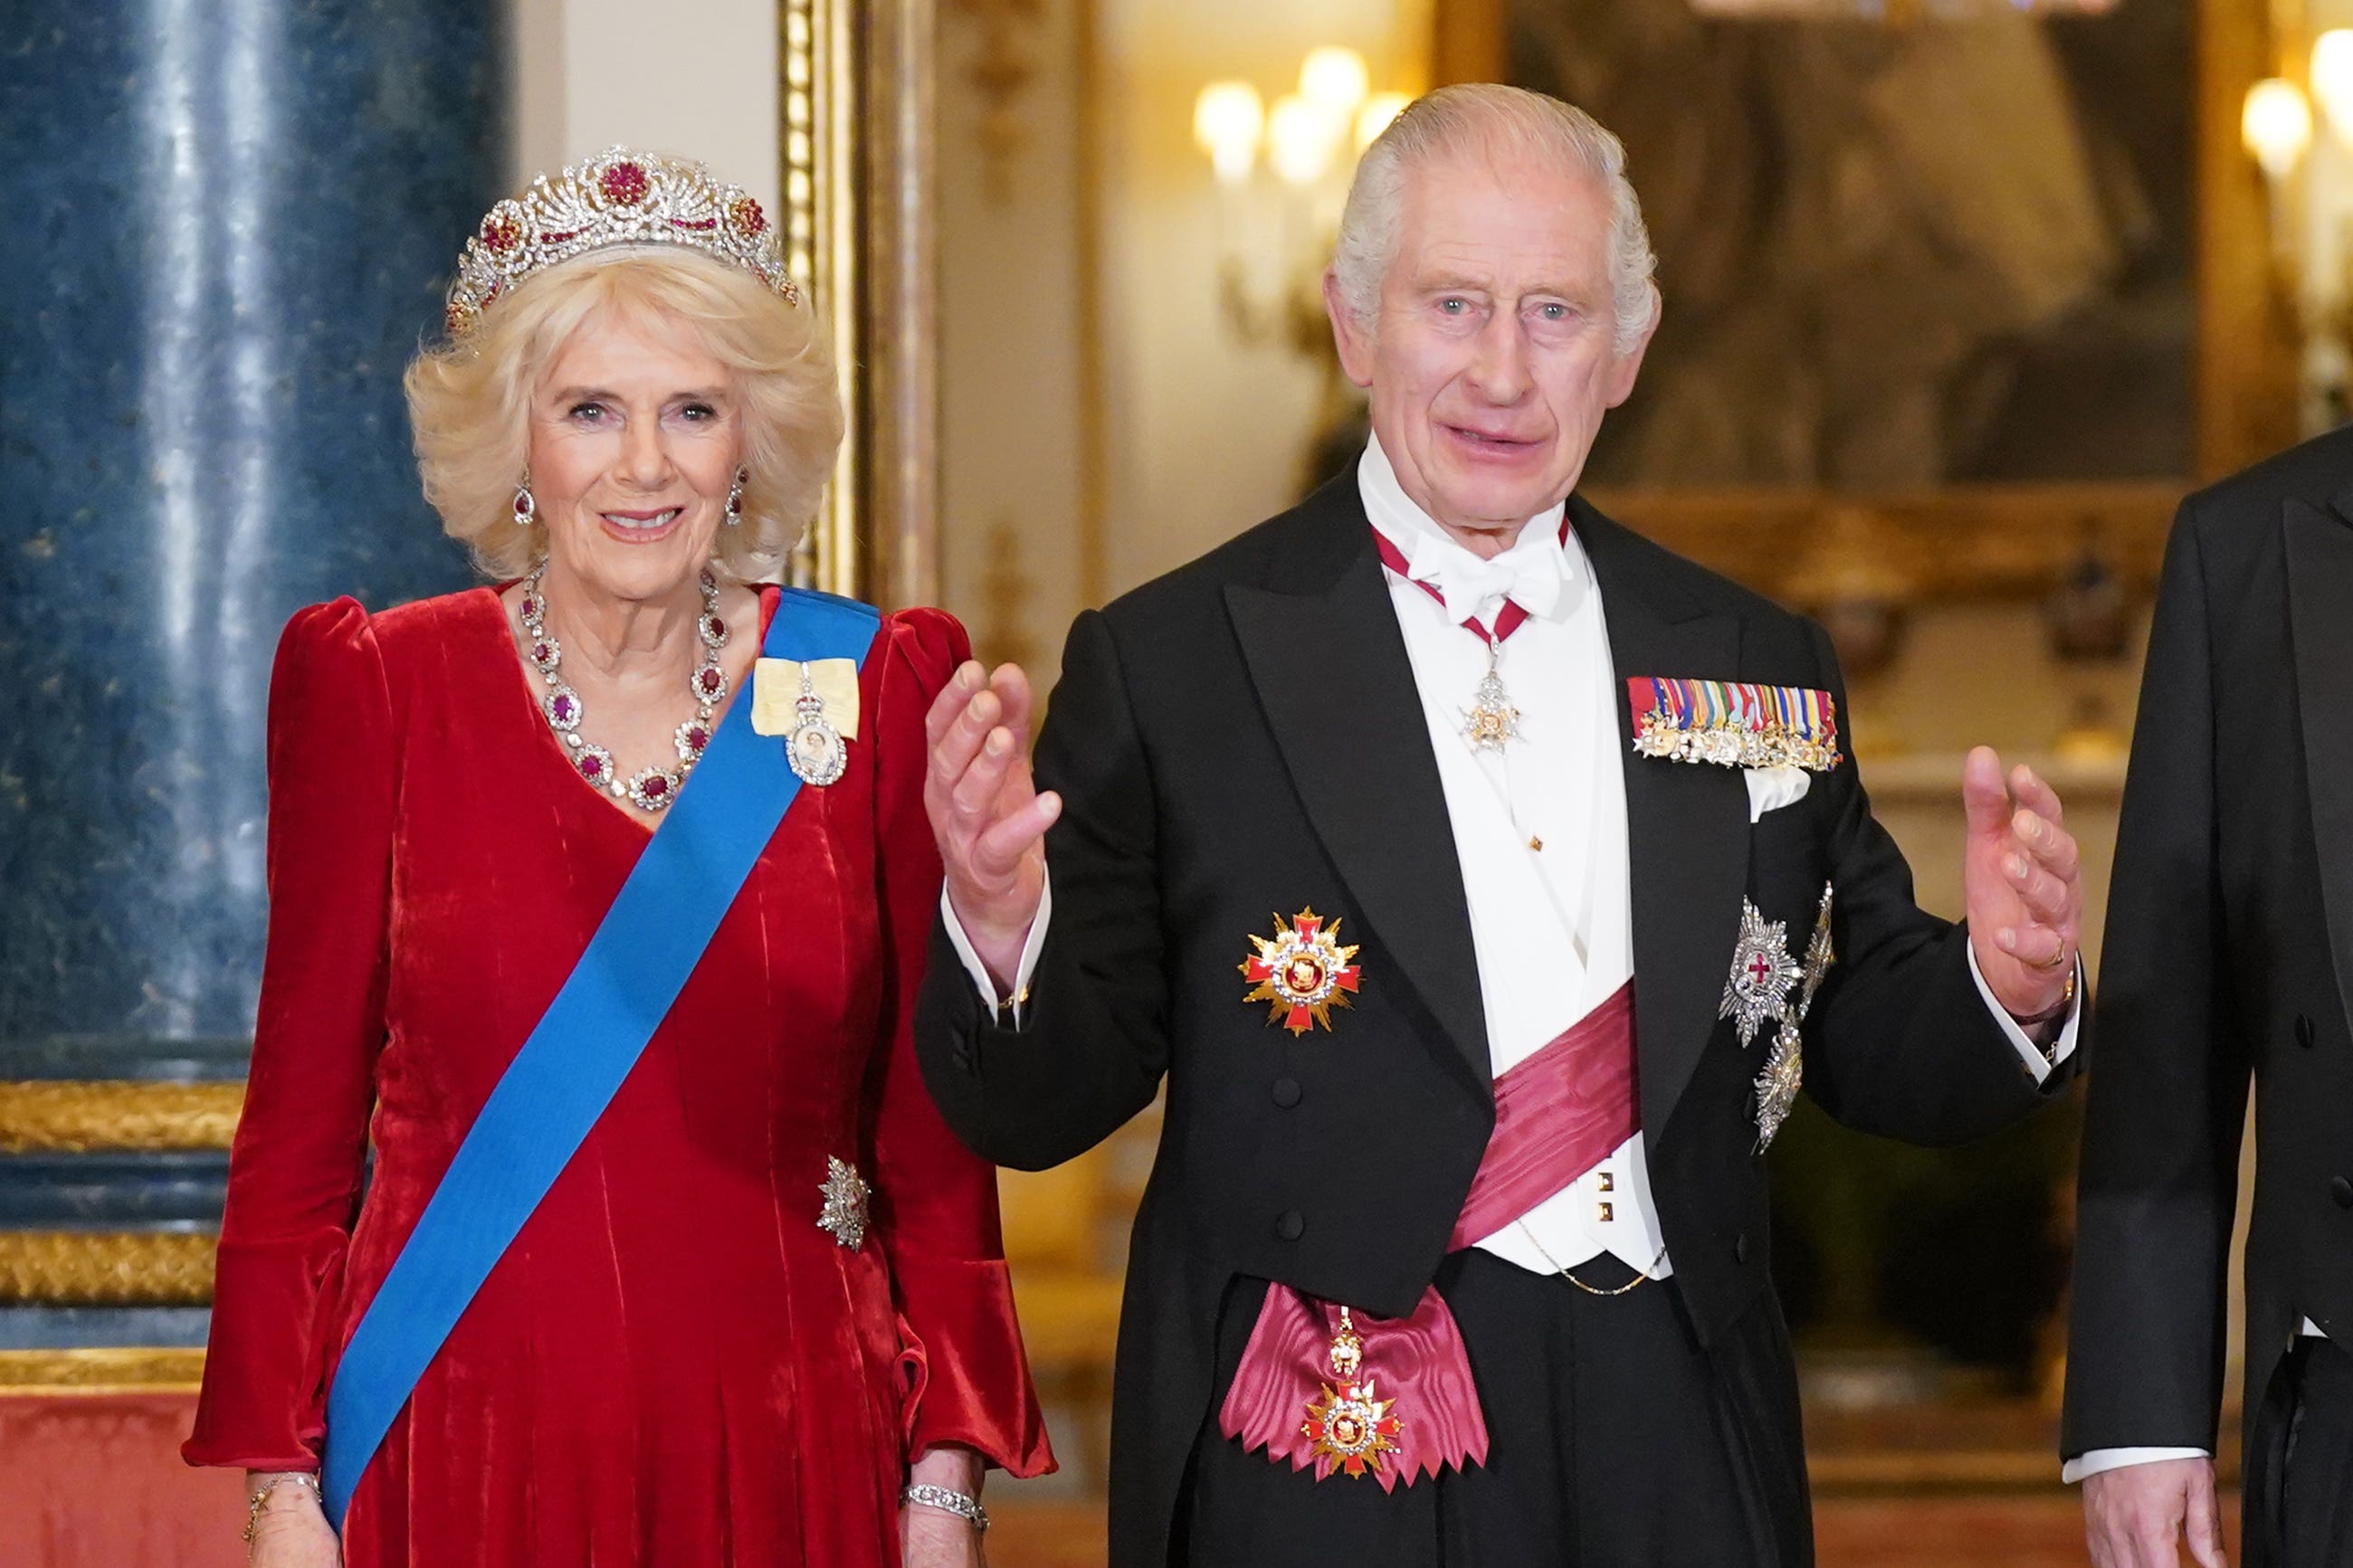 The Queen and King ahead of the state banquet at Buckingham Palace (Yui Mok/PA)